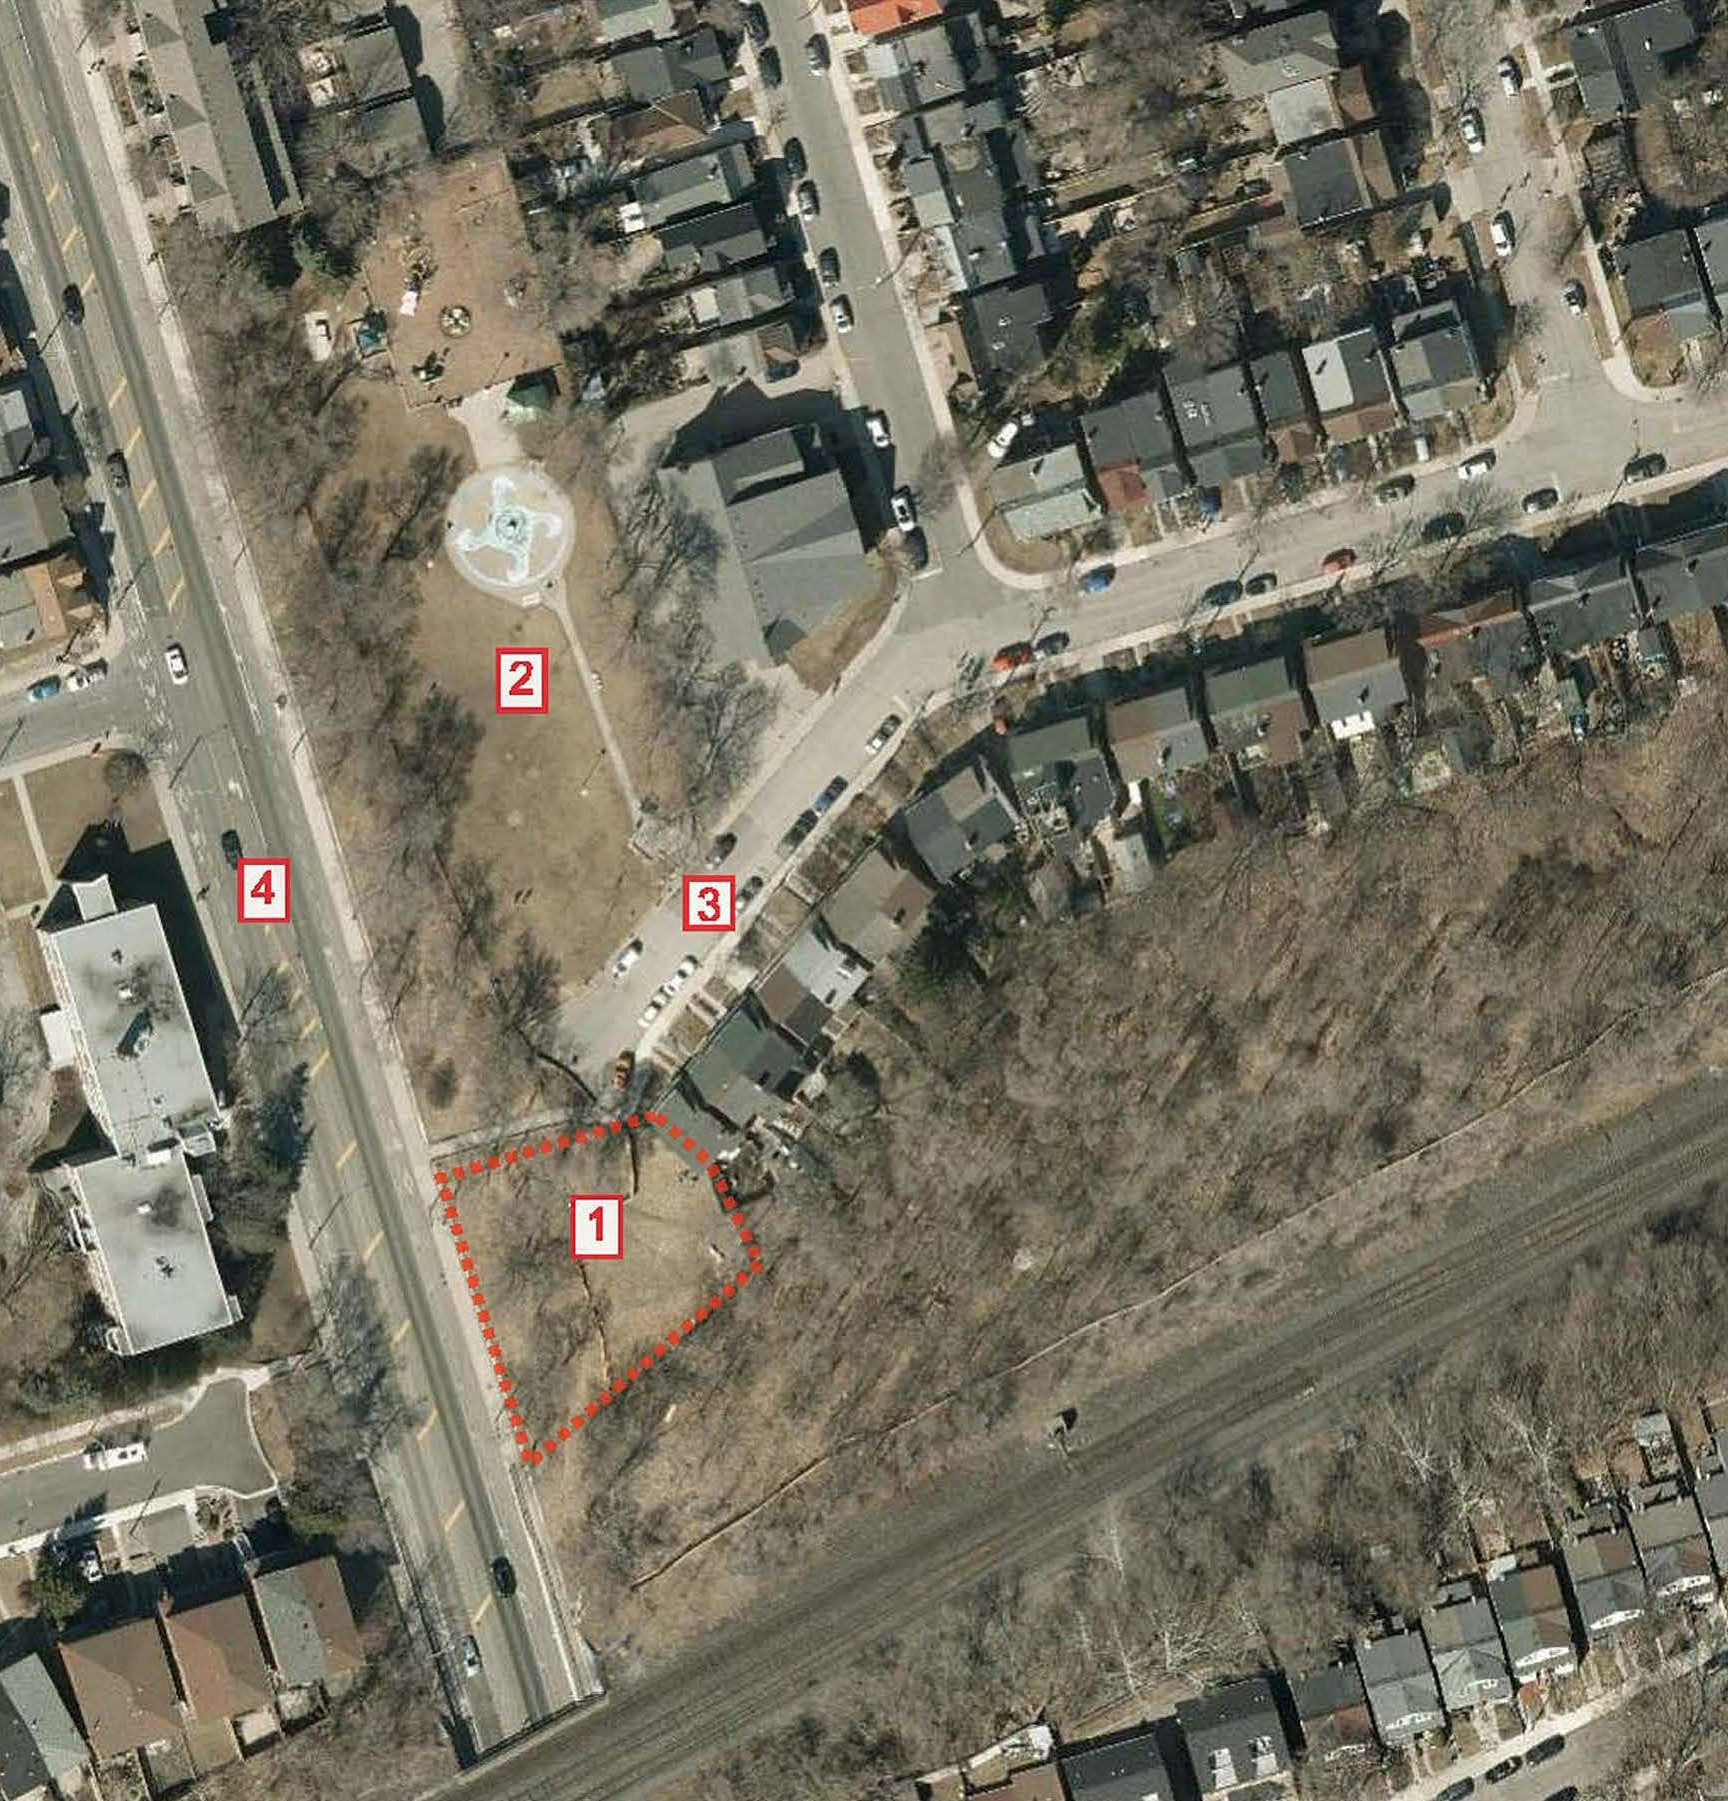 Aerial view of the project area, located between Oakcrest Avenue to the north-east and Woodbine Avenue to the west. Oakcrest Parkette is located just north of the project site, on the north side of Oakcrest Avenue and east of Woodbine Avenue.